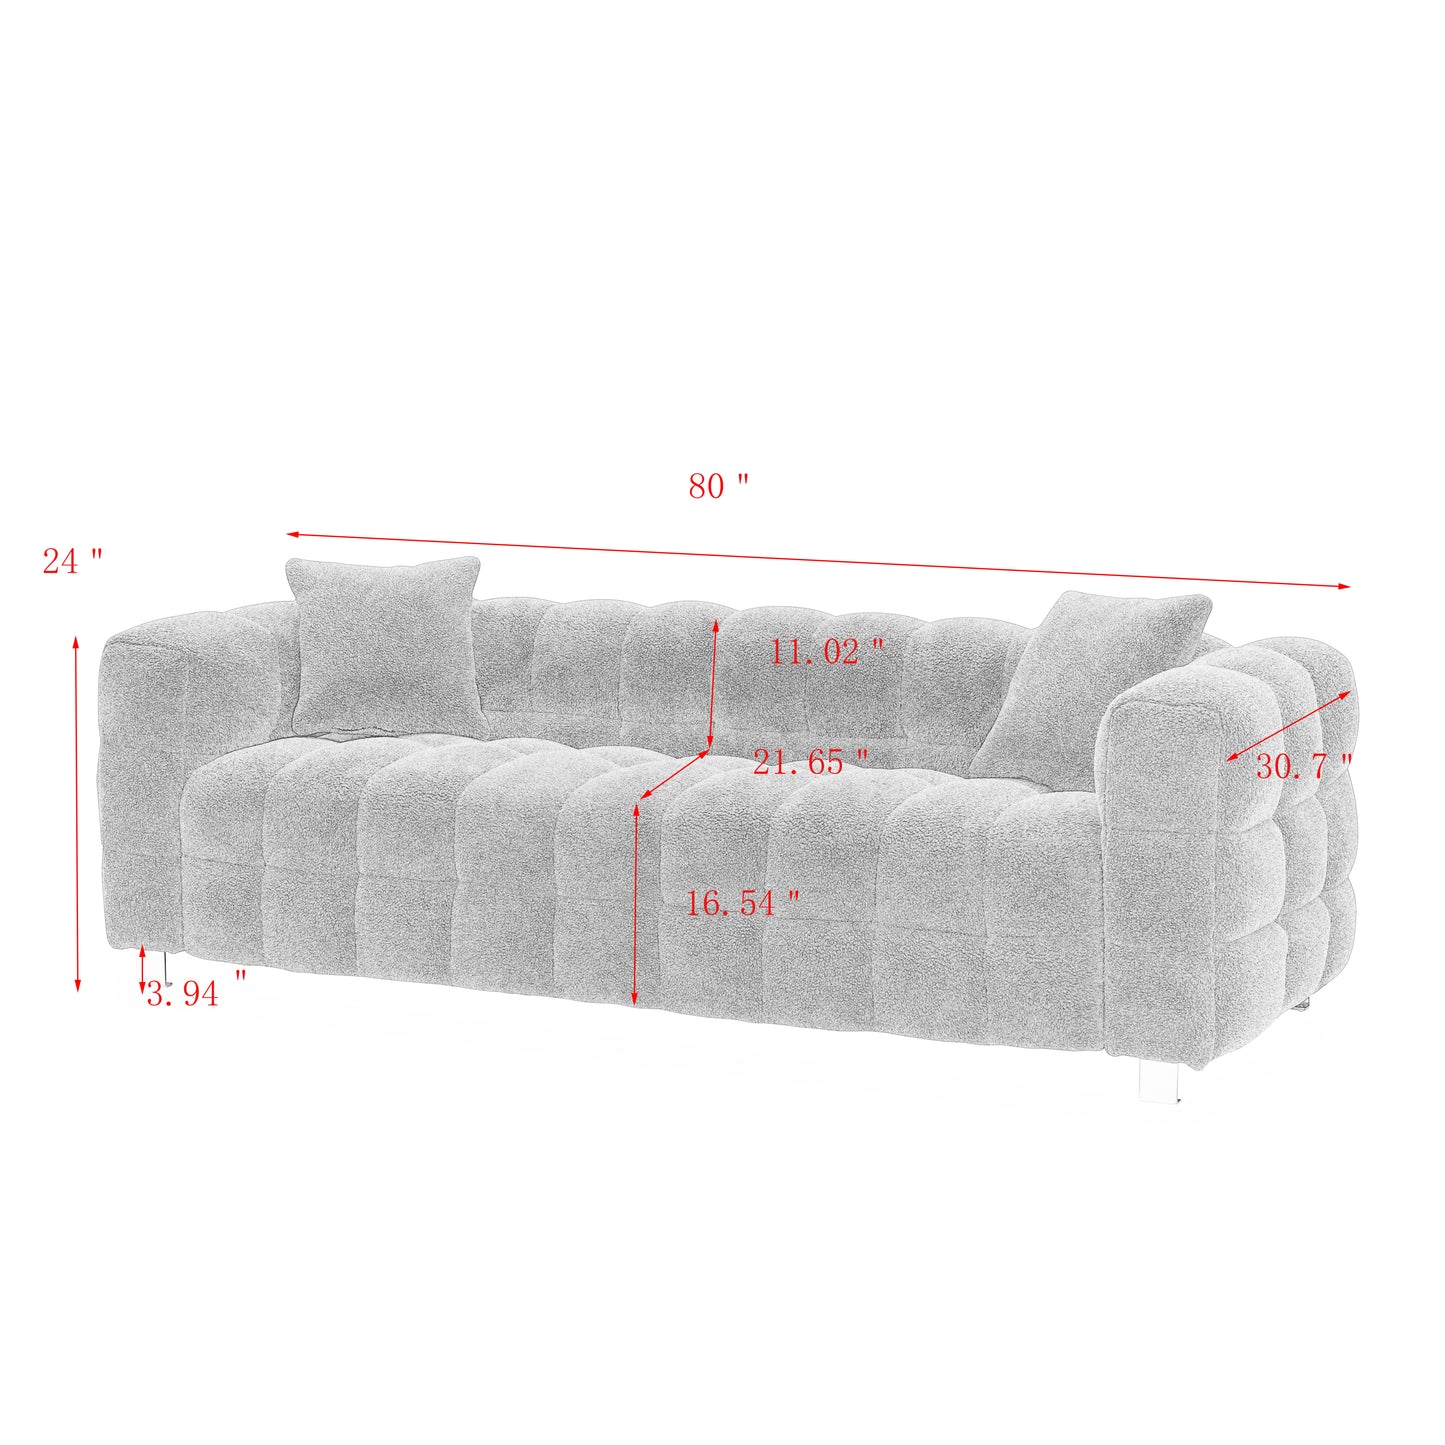 2146 sofa includes two pillows, 81 "beige white, for living room and bedroom